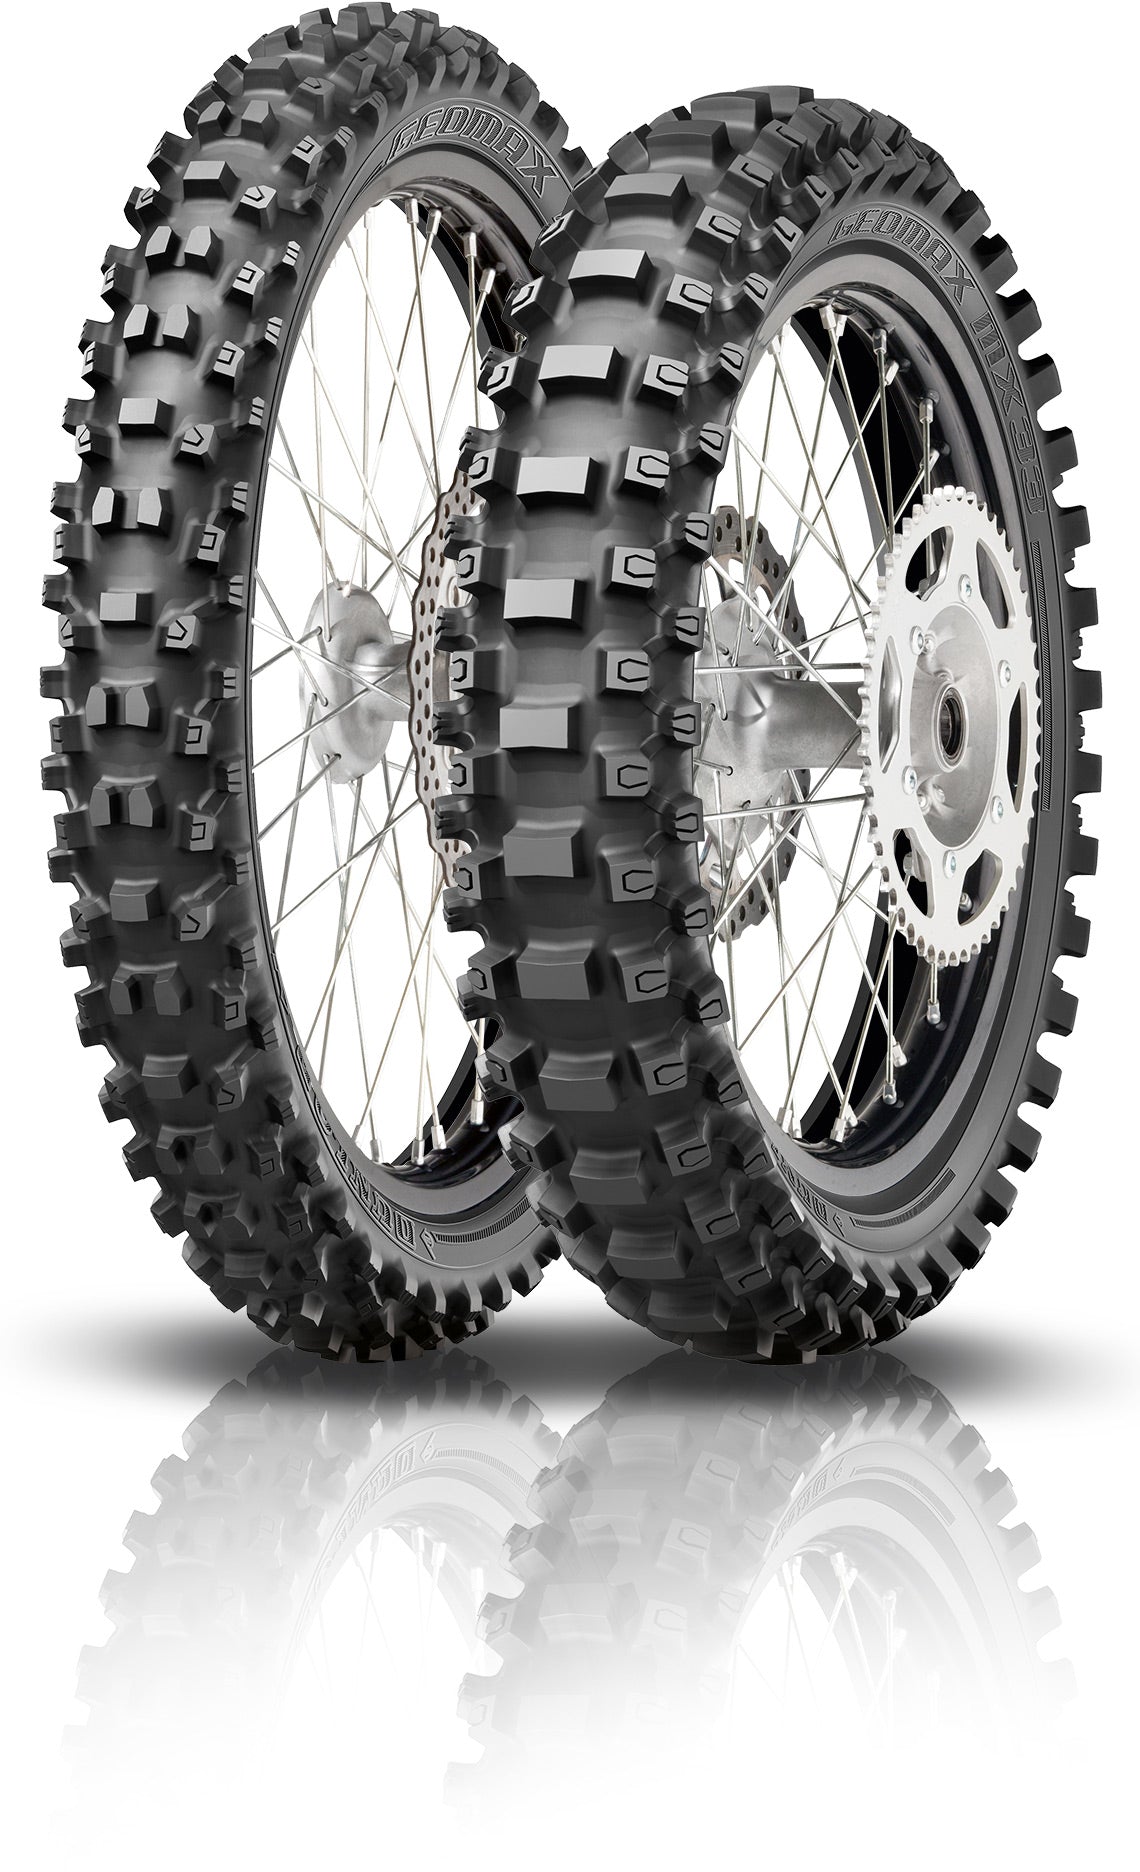 DUNLOP GEOMAX MX33 (SOFT) - FRONT